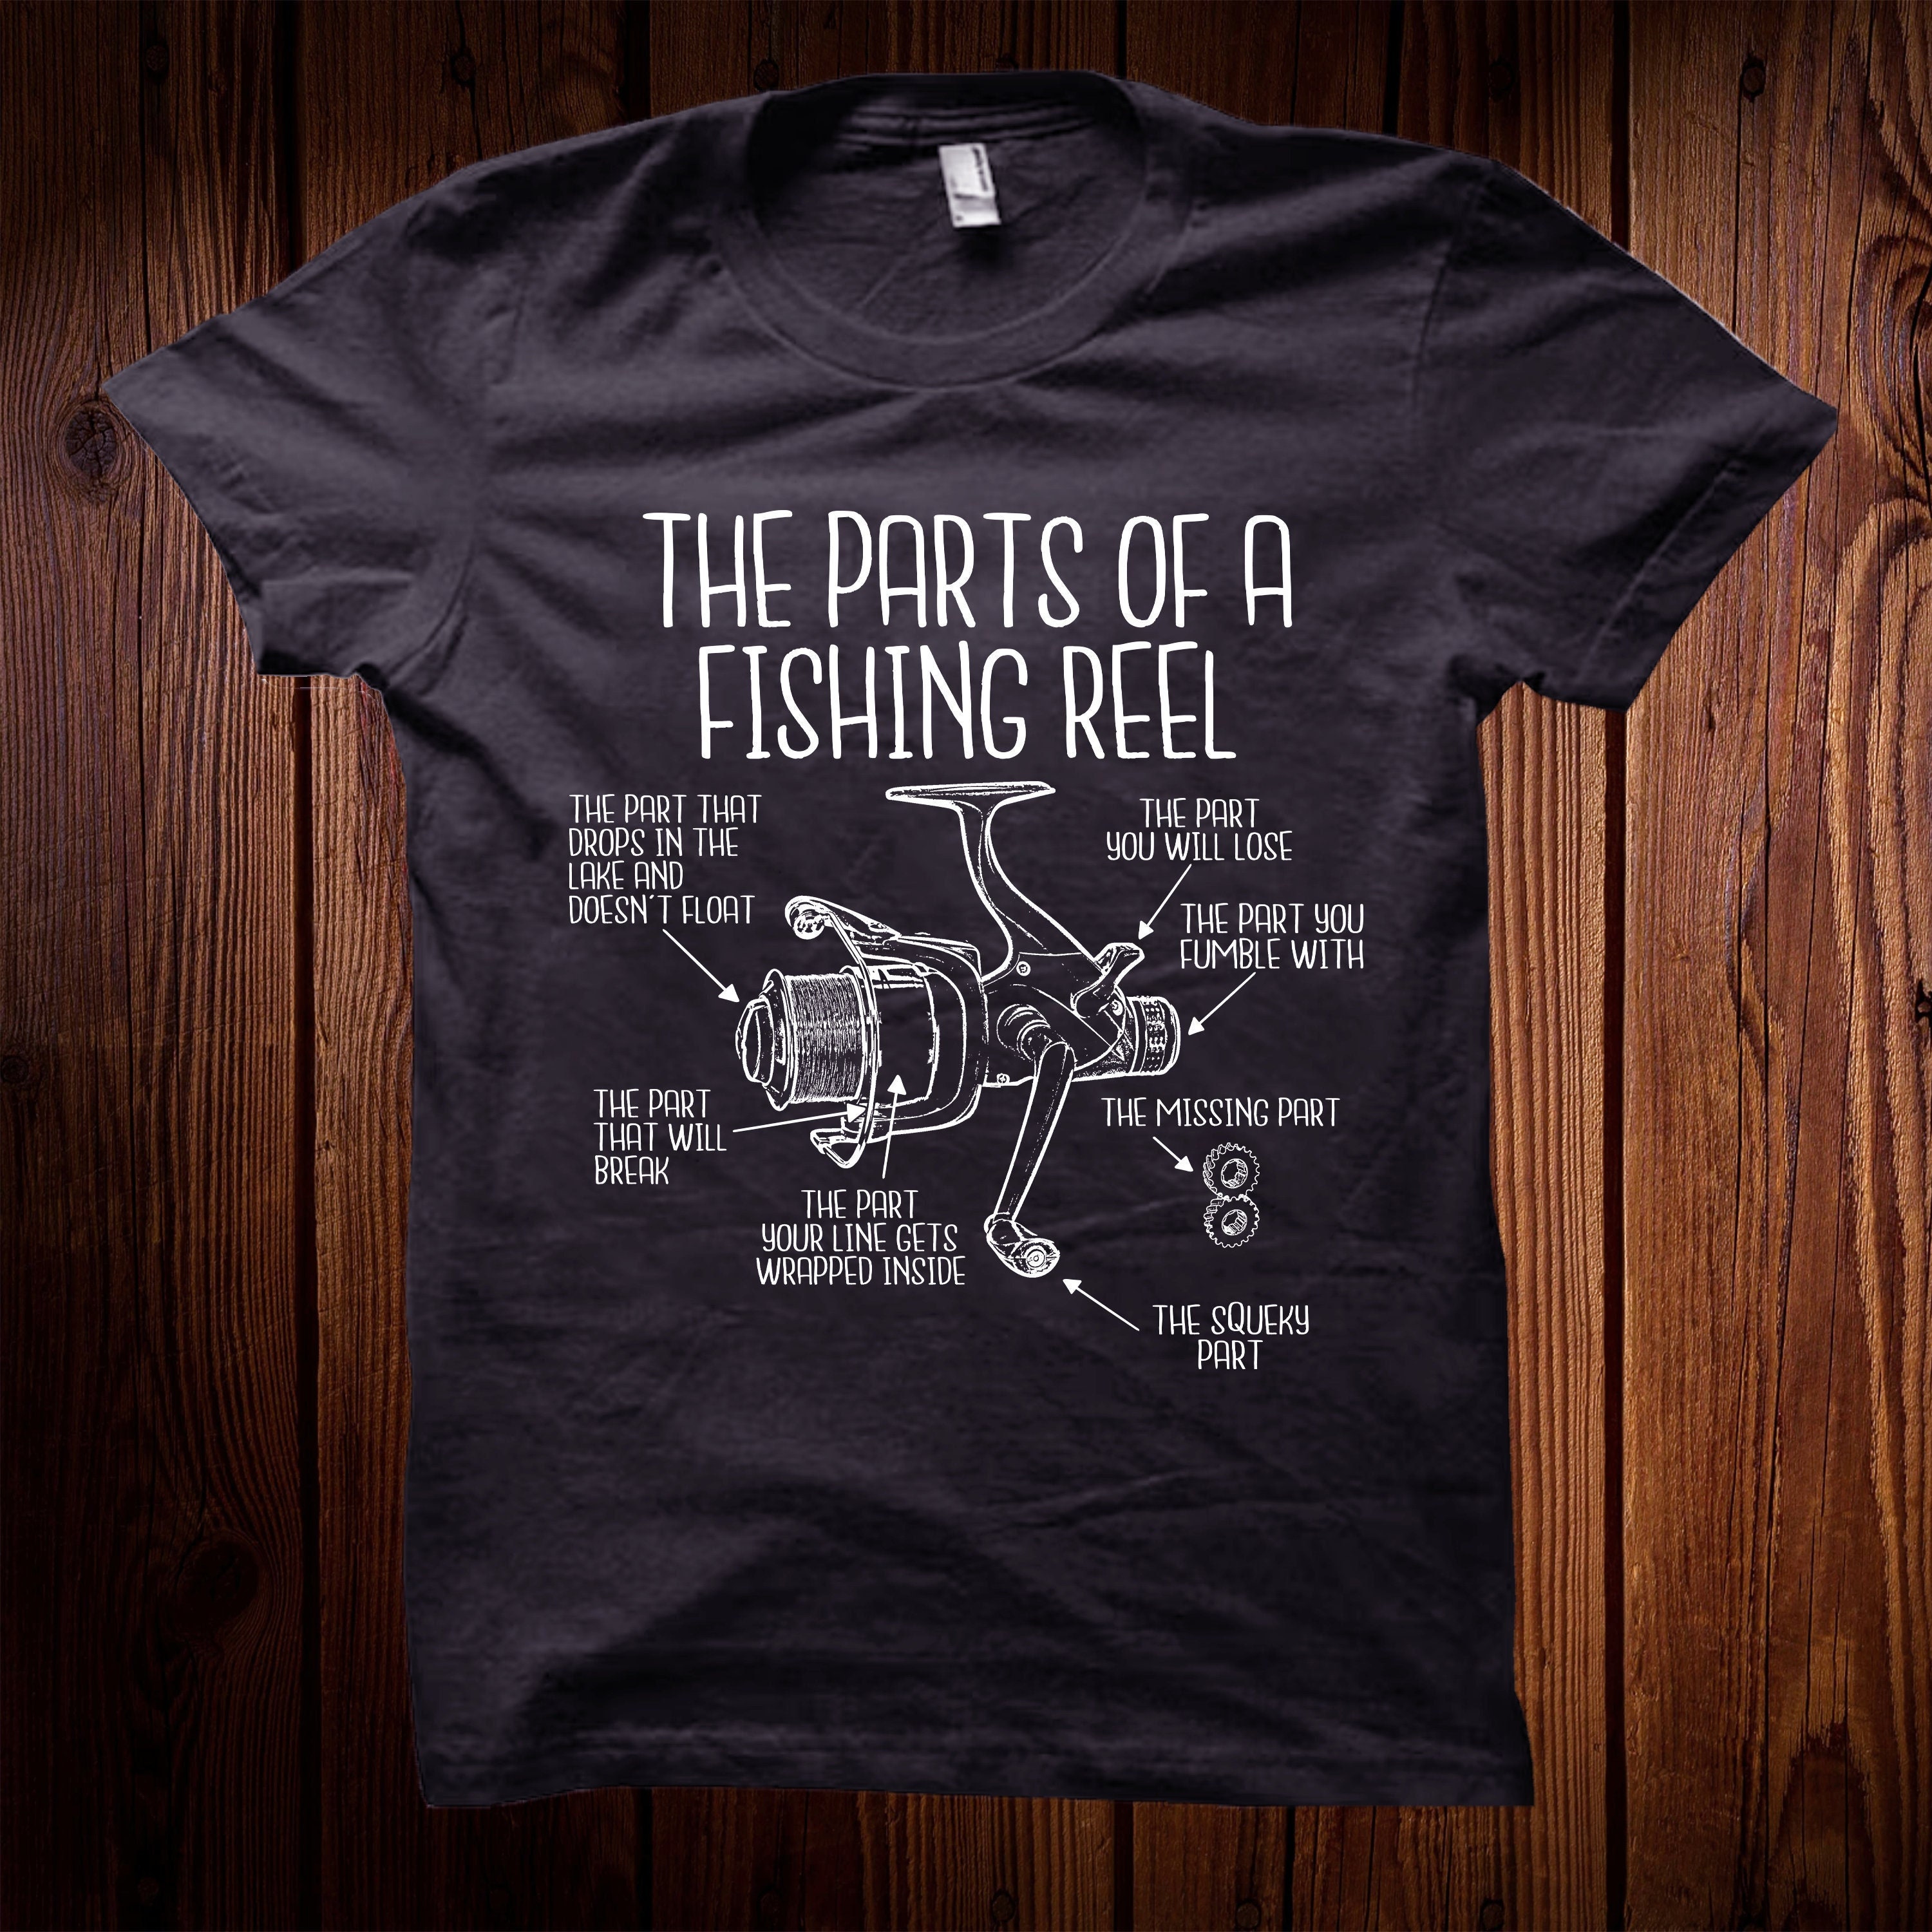 The Parts of A Fishing Reel - Funny Fishing Fisherman Humor T-Shirt, Gift for Fisherman Fisher Tee Shirt, Fathers Day Gift Ideas